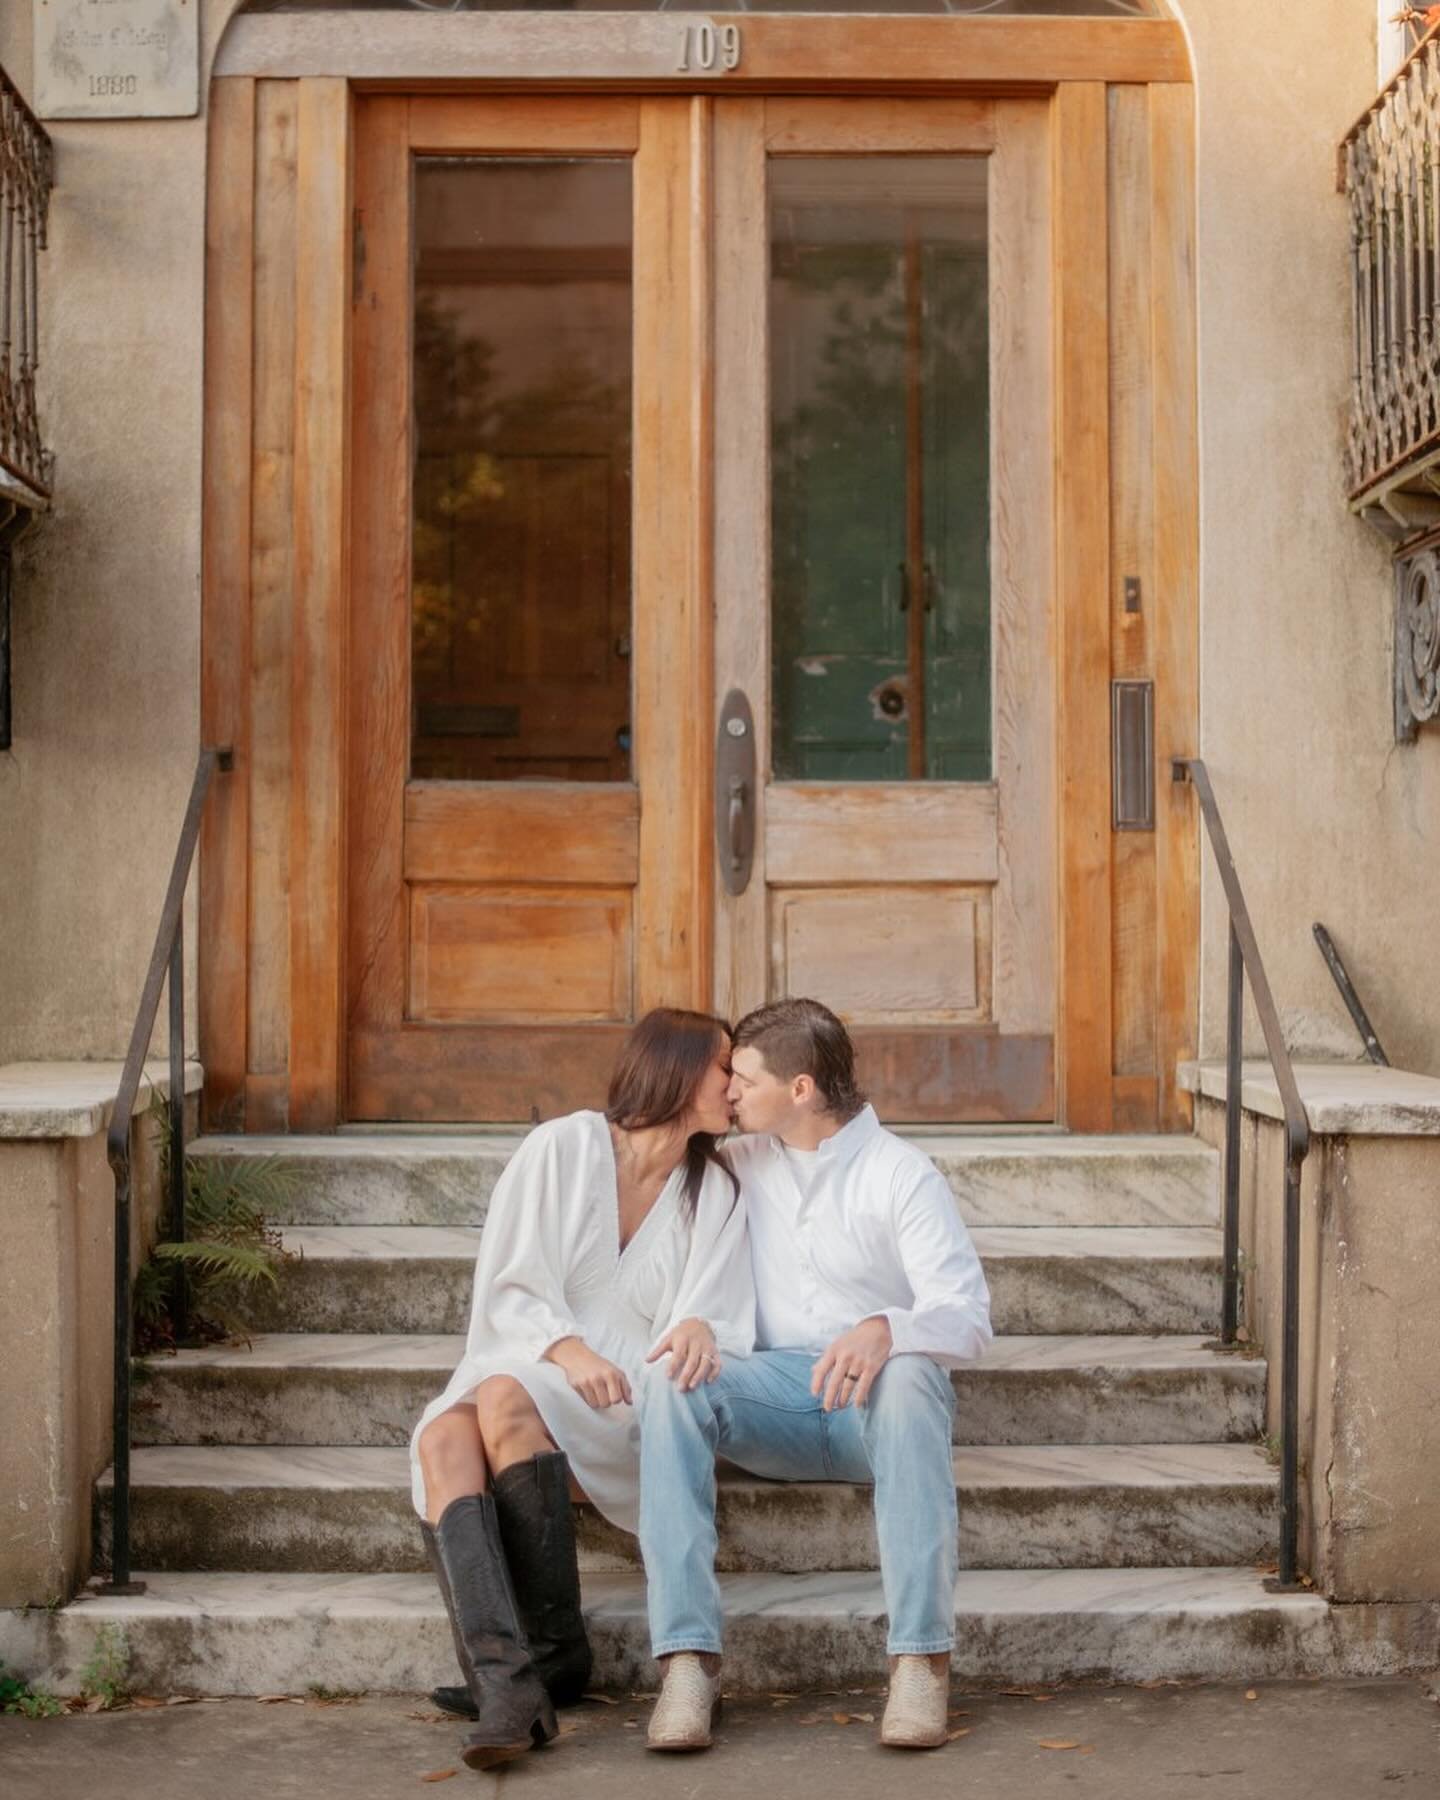 After privately eloping the day prior, Lauren &amp; Lee celebrated with a trip to Savannah 💛 I love a love like this.